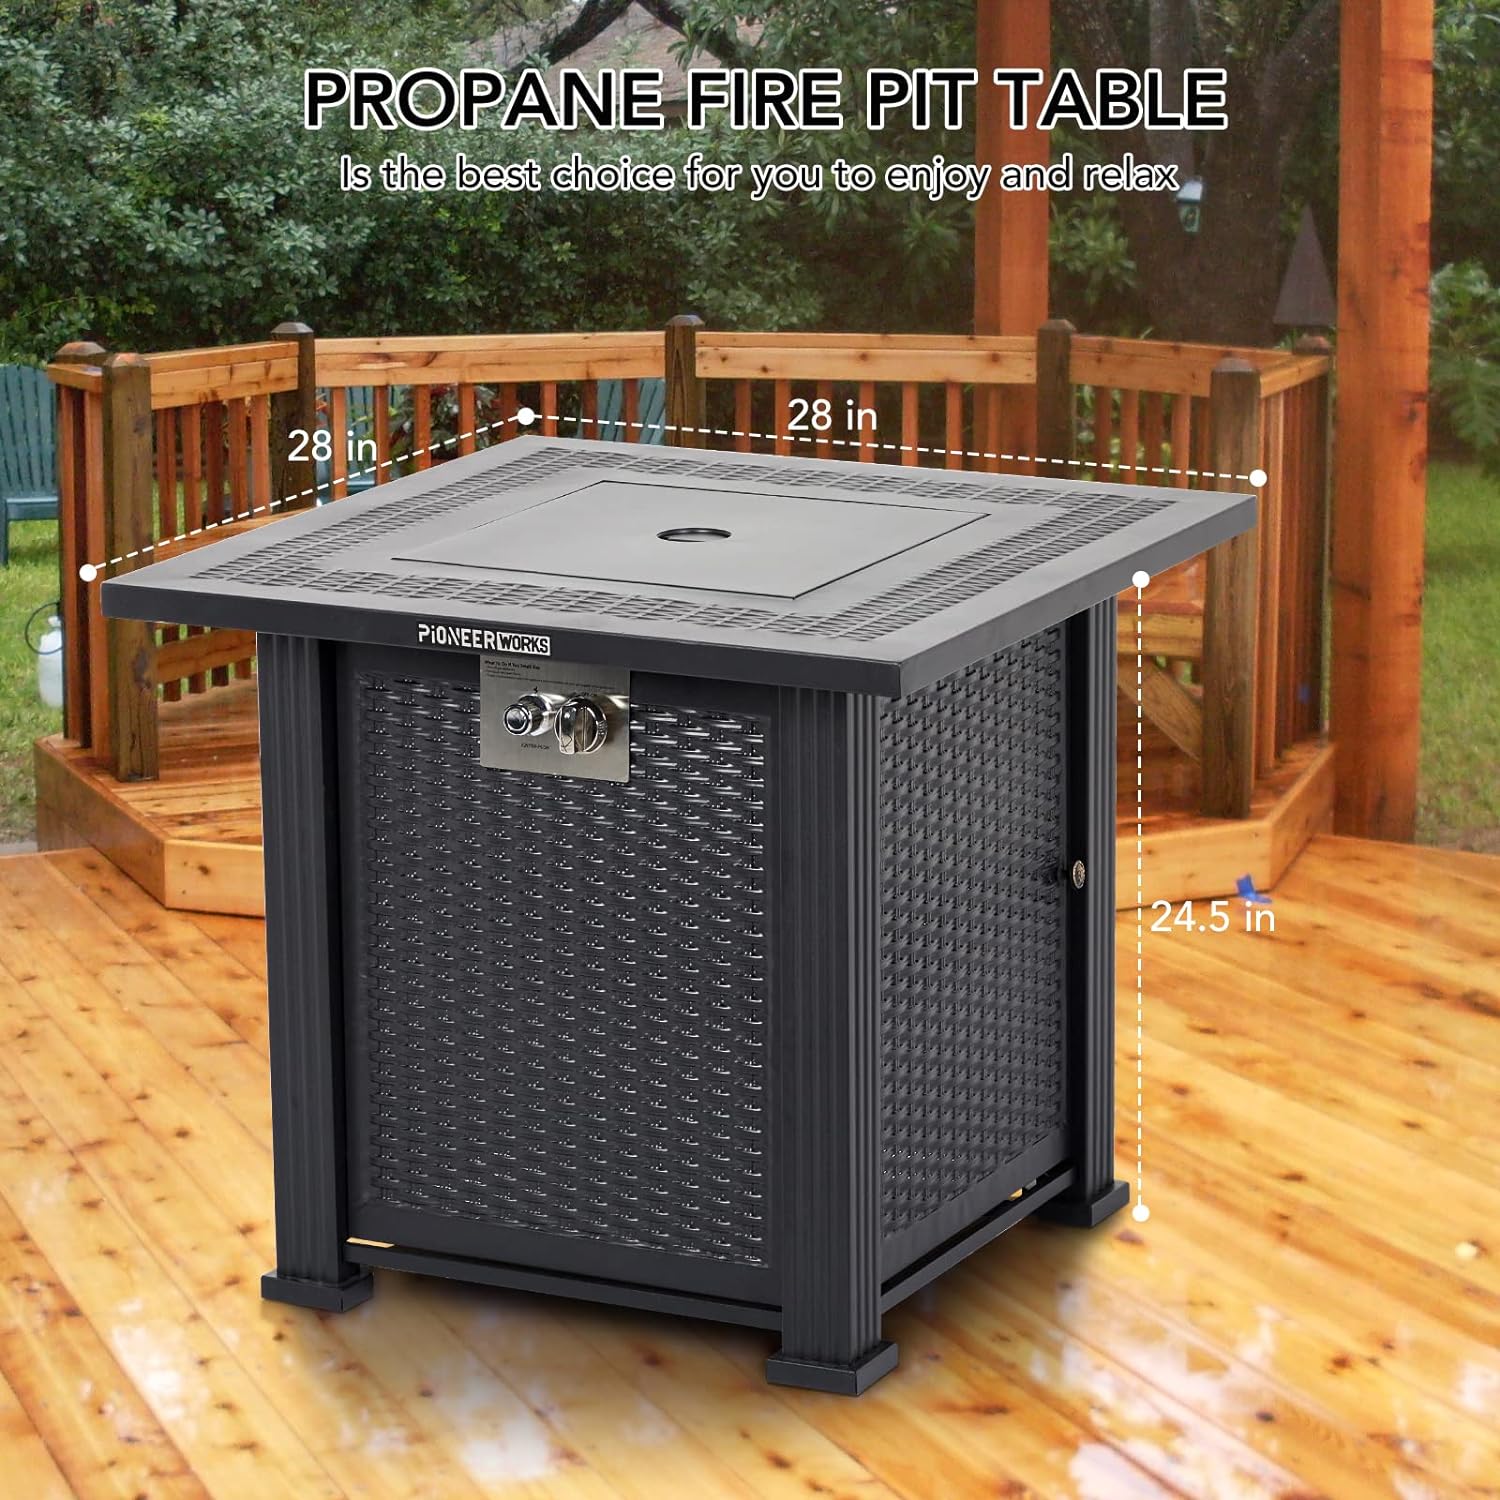 PioneerWorks Propane Fire Pit Table Review